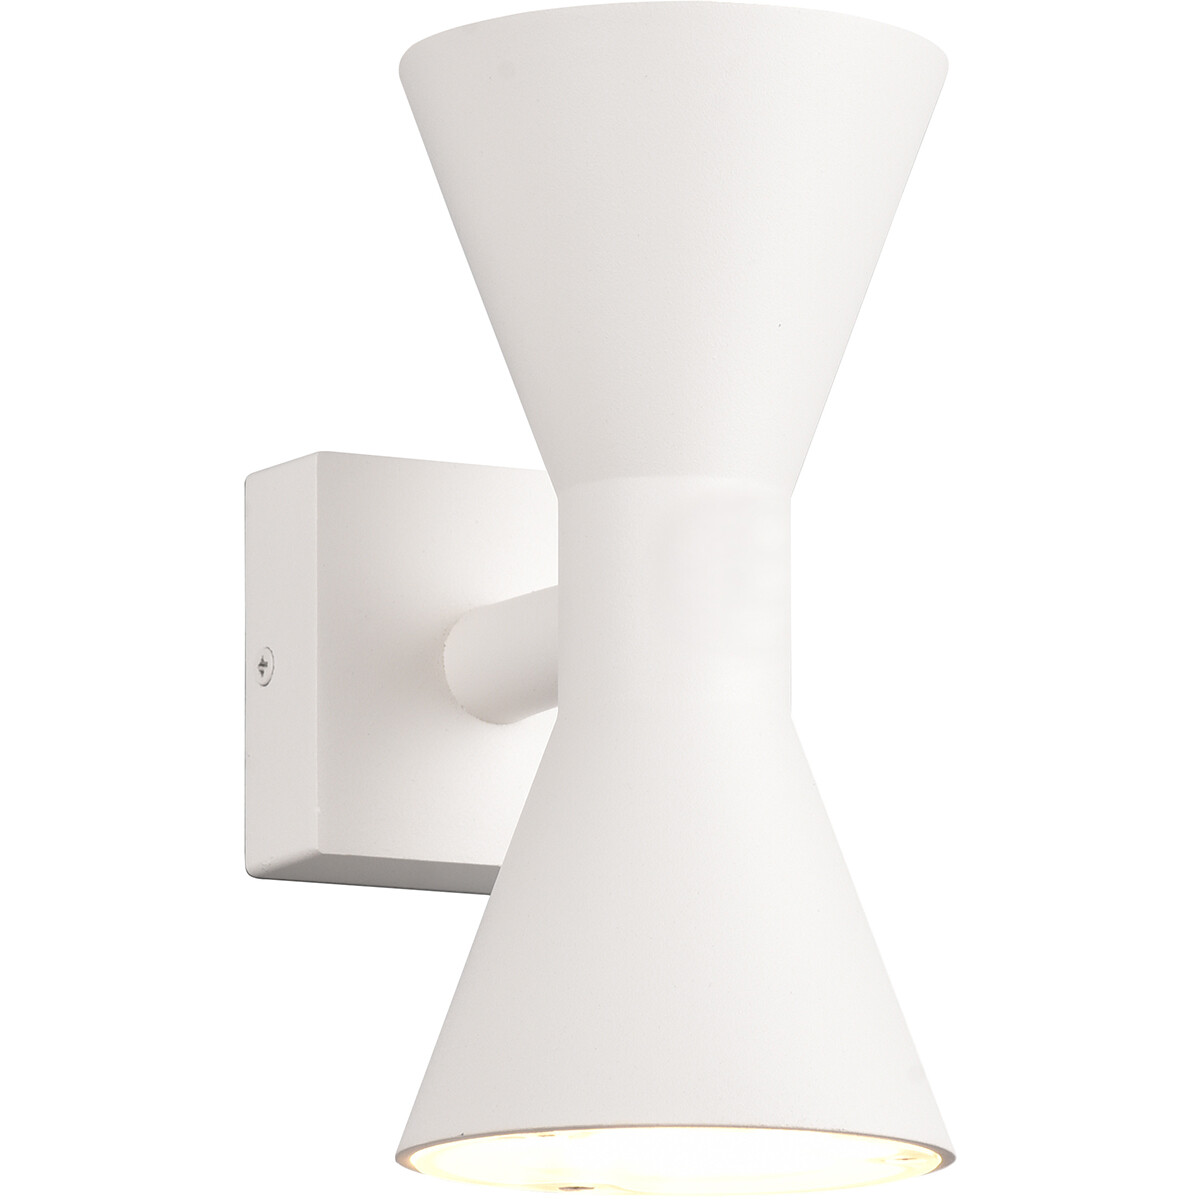 LED Tuinverlichting Wandlamp Buitenlamp Trion Ardis Up and Down GU10 Fitting Spatwaterdicht IP44 Ron